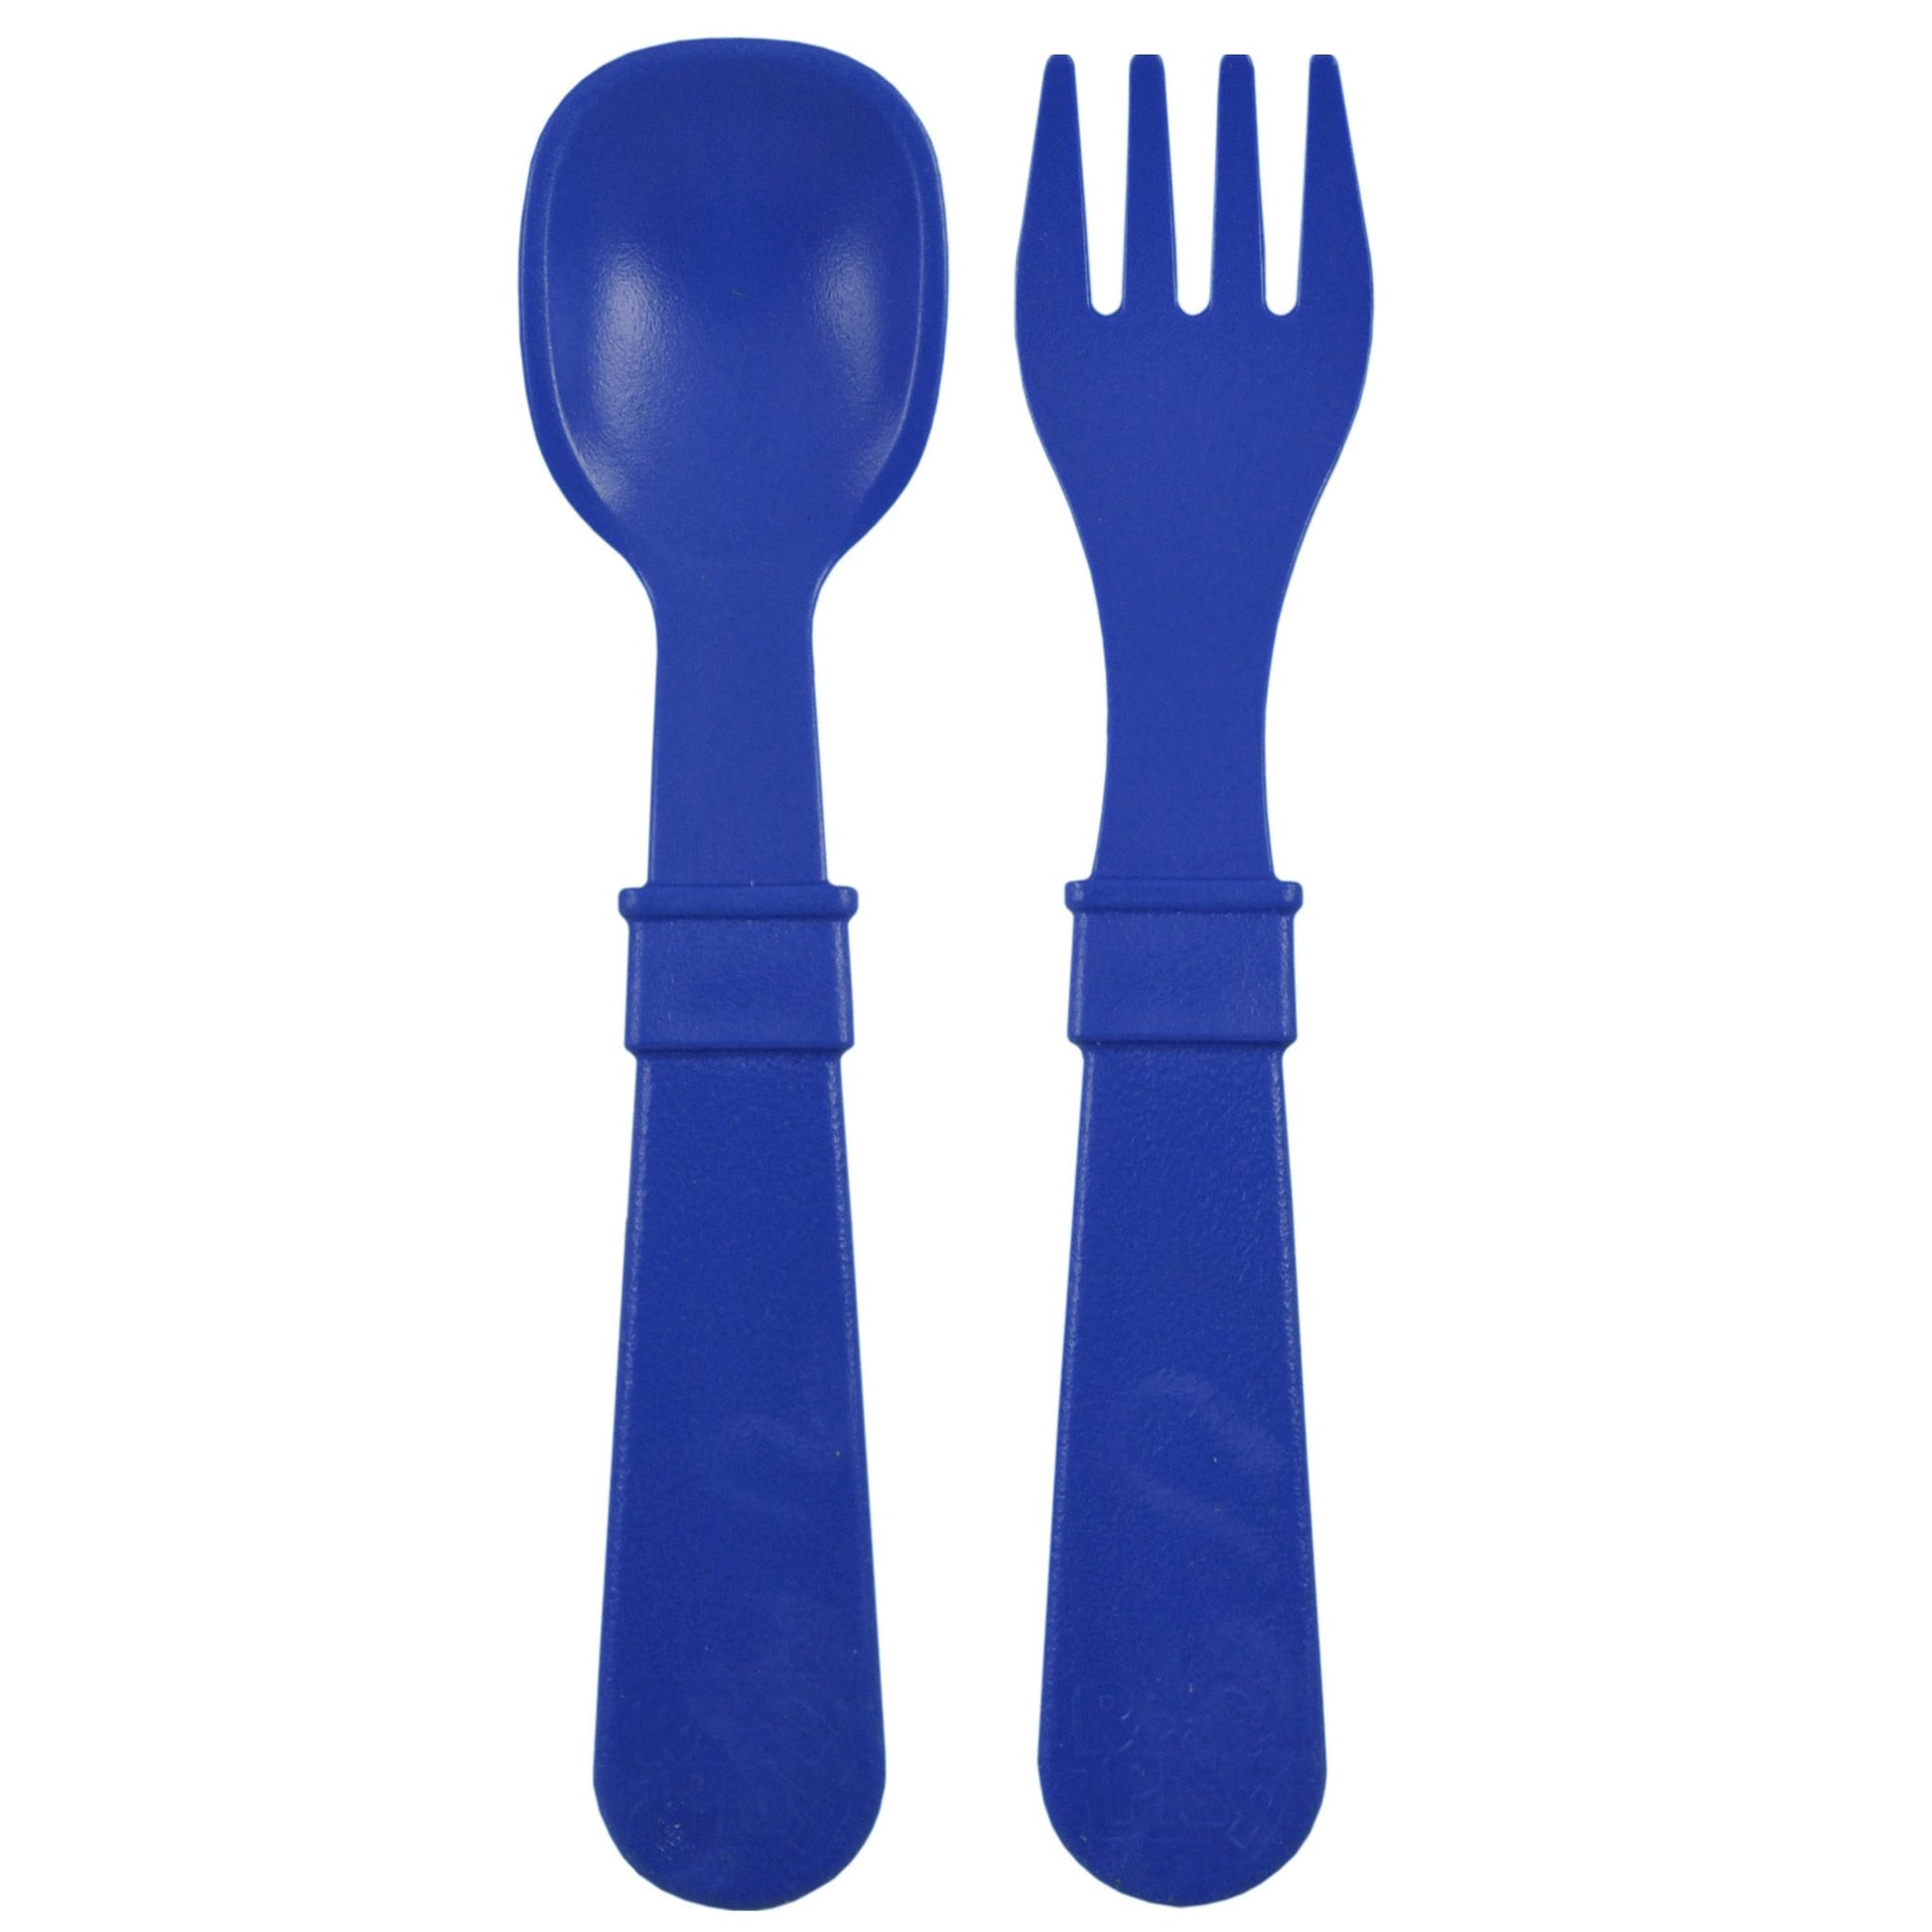 Replay Fork and Spoon - Navy Blue